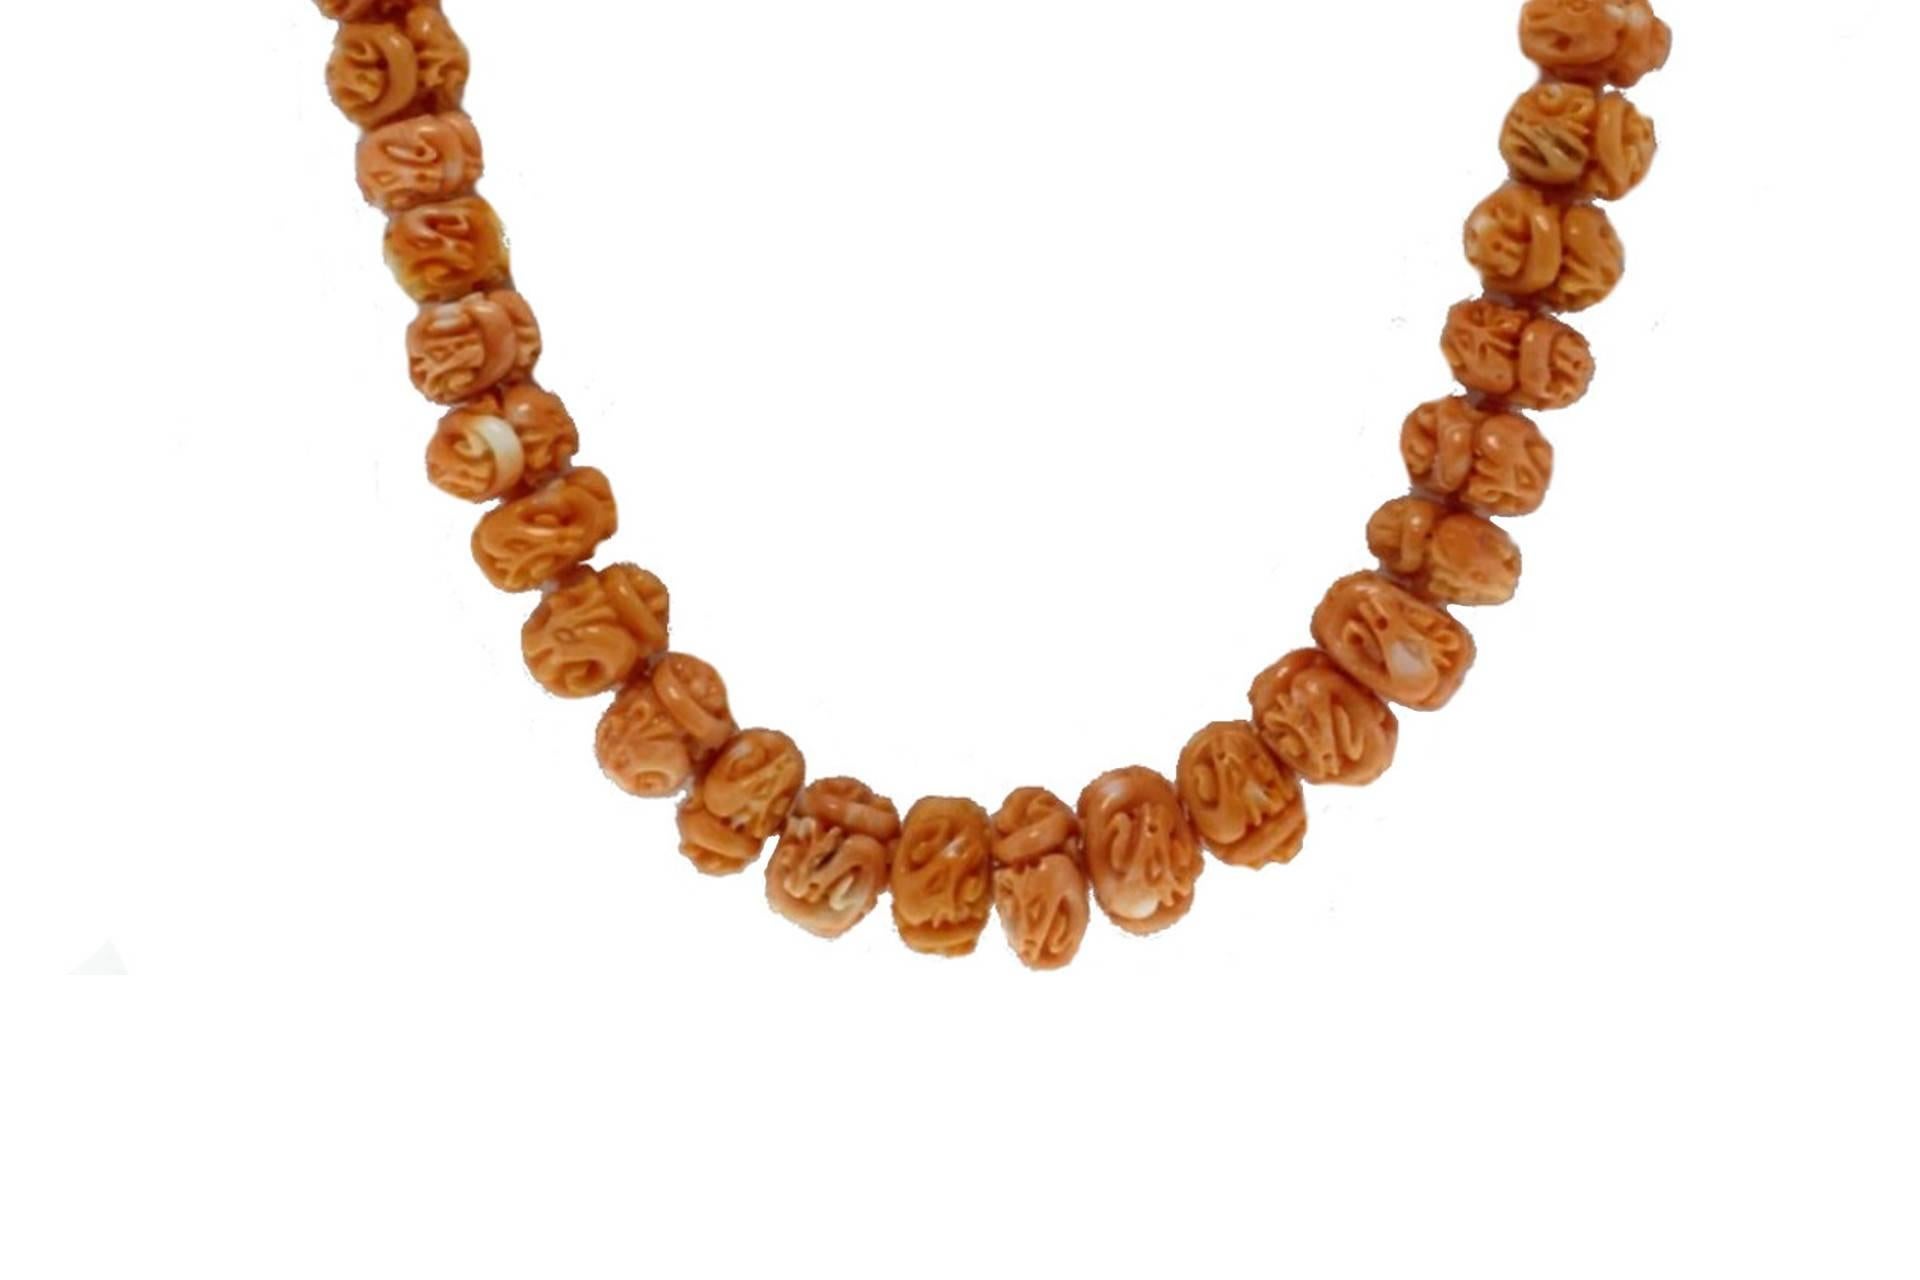 SHIPPING POLICY:
No additional costs will be added to this order.
Shipping costs will be totally covered by the seller (customs duties included).

Amazing carved coral necklace in 18kt yellow gold.
tot weight 88.4gr
r.f.  uirf
Lenght 52